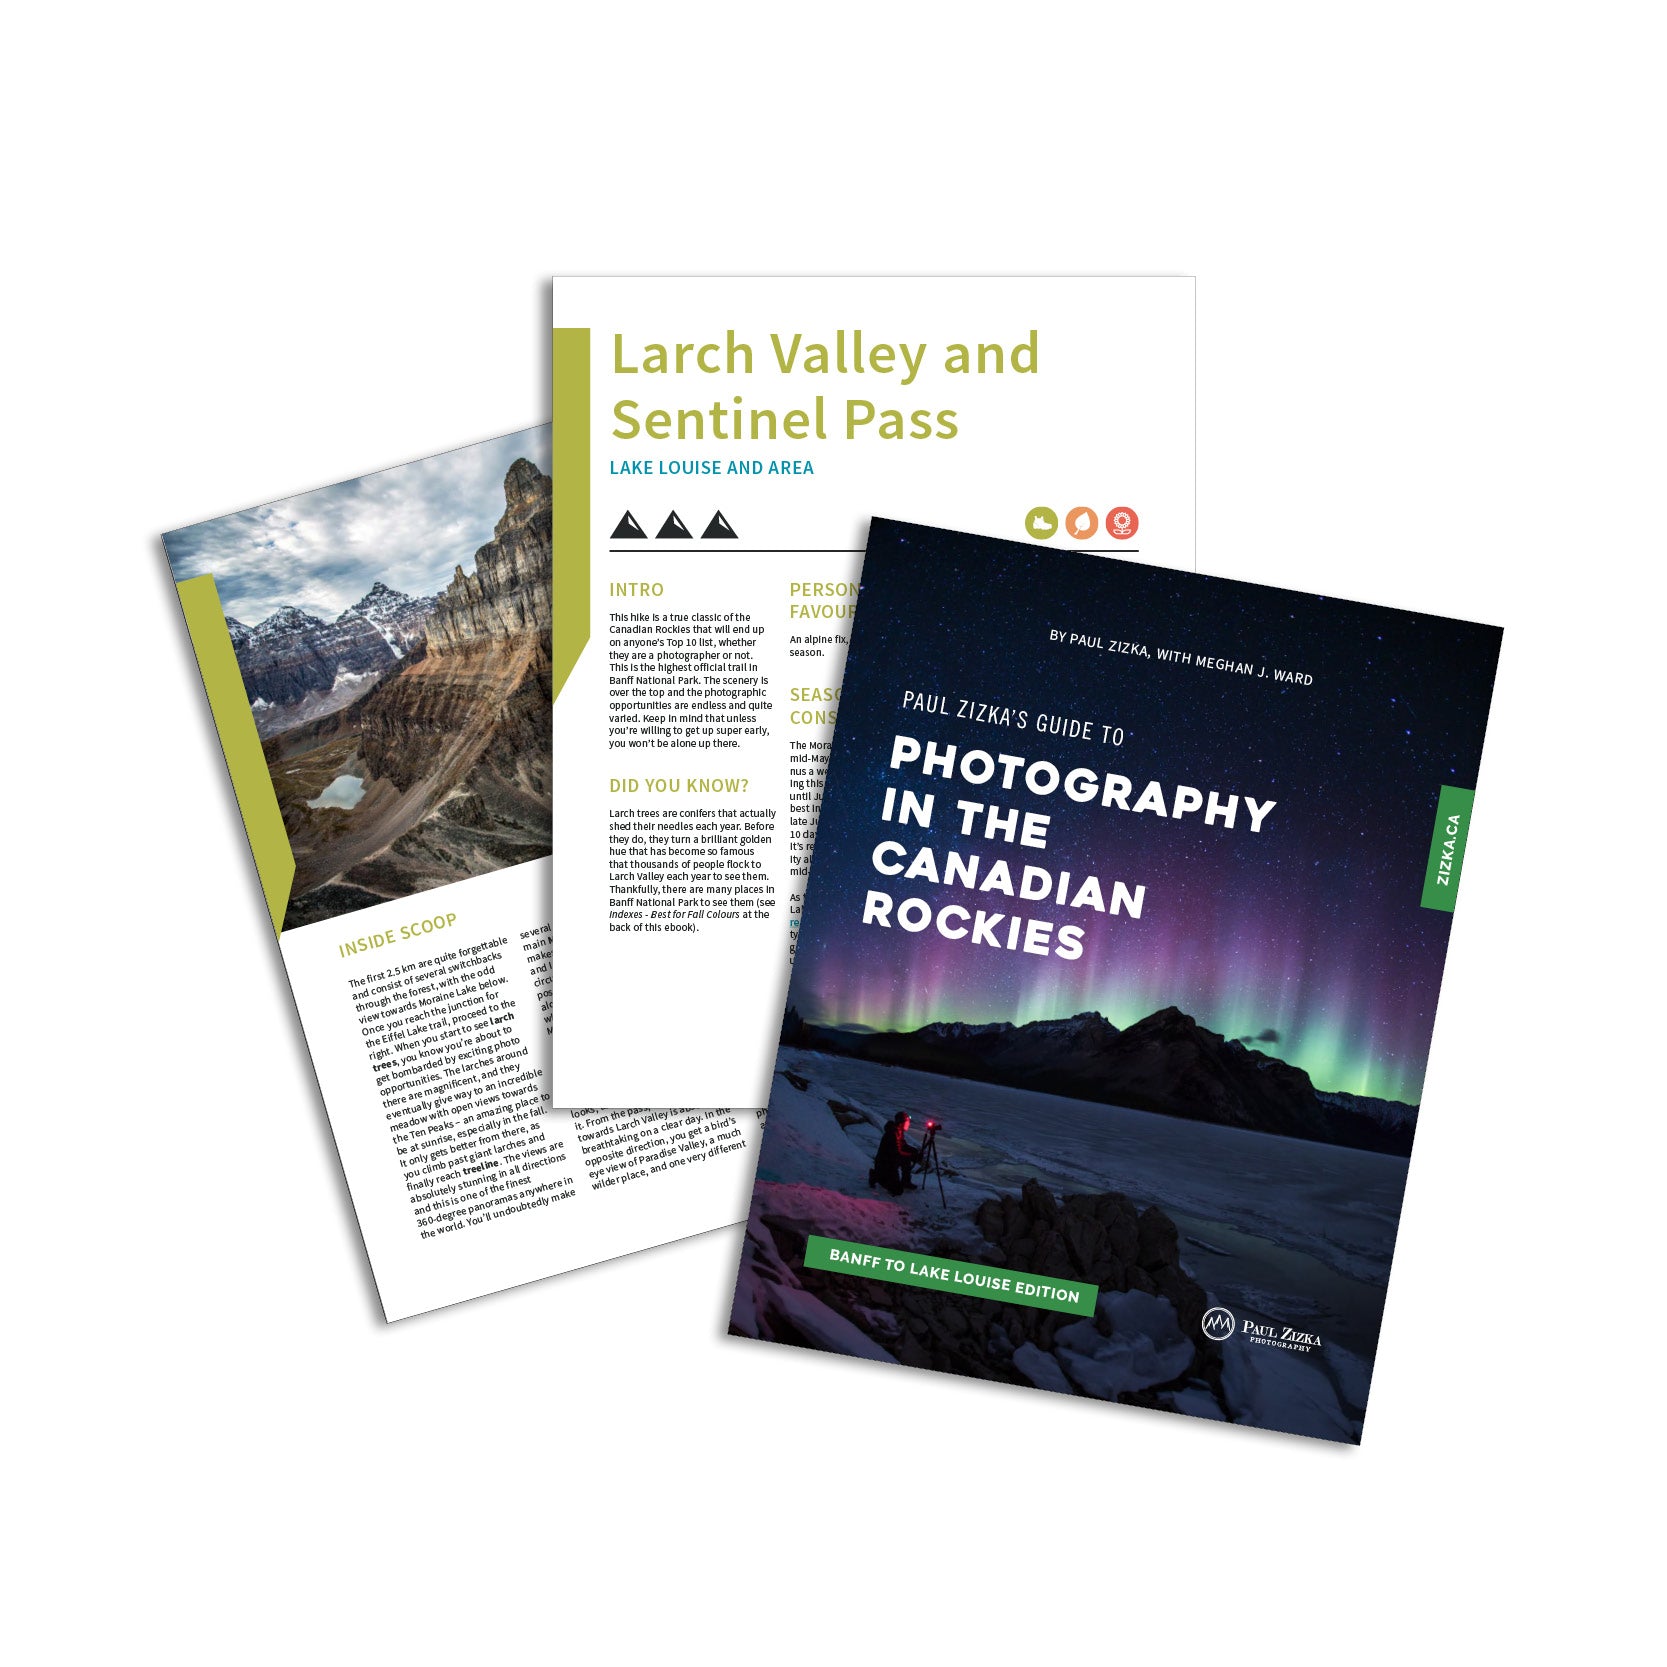 eBook: Paul Zizka's Guide to Photography in the Canadian Rockies - Banff to Lake Louise Edition